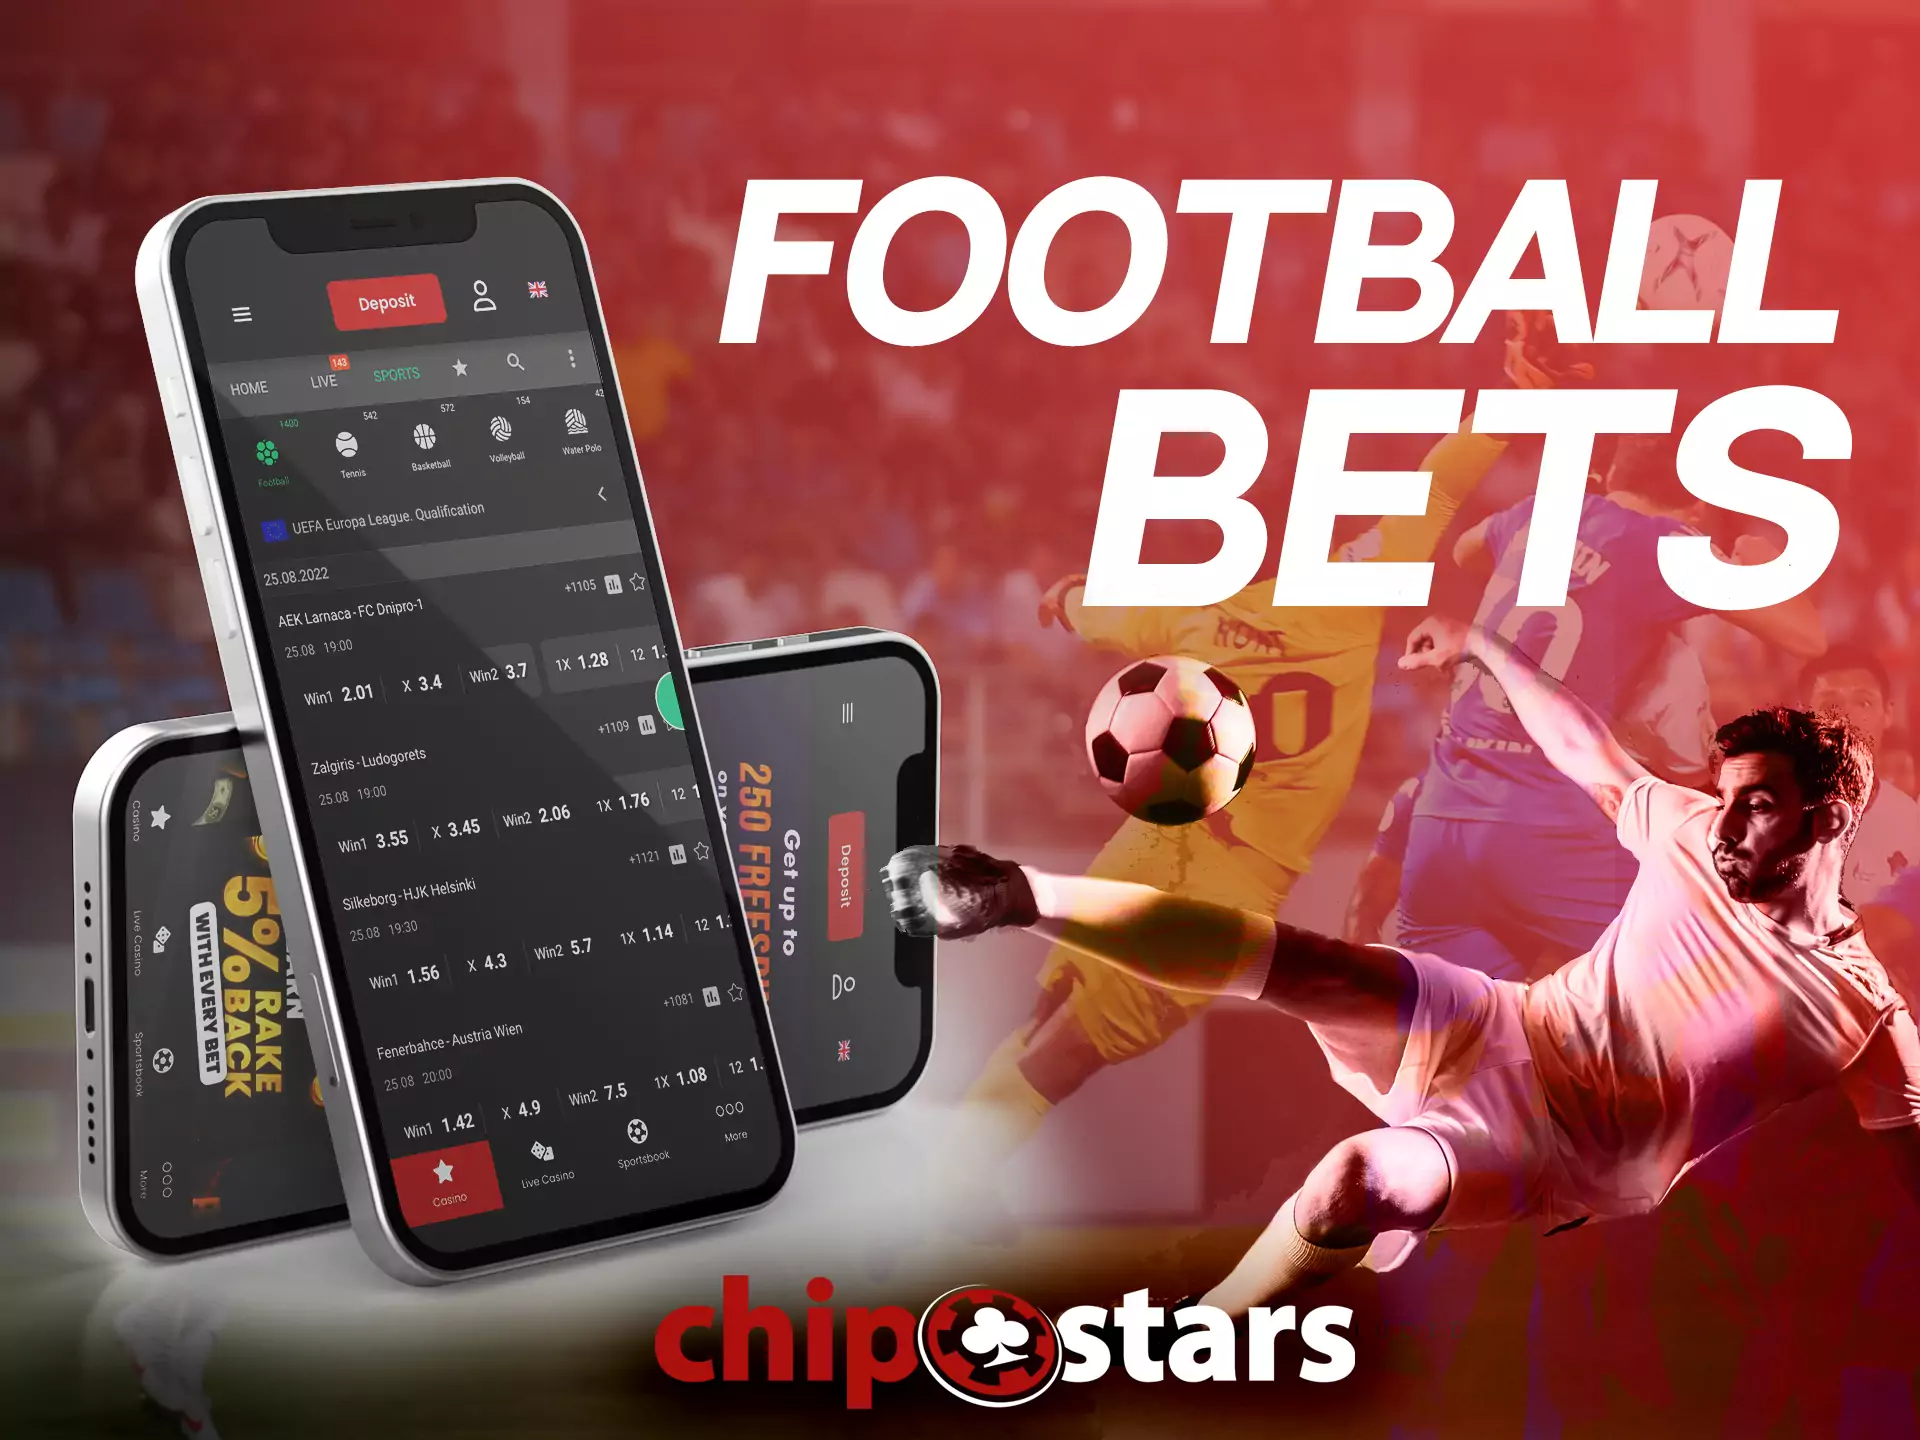 In the Chipstars sportsbook, you can place a bet on football.